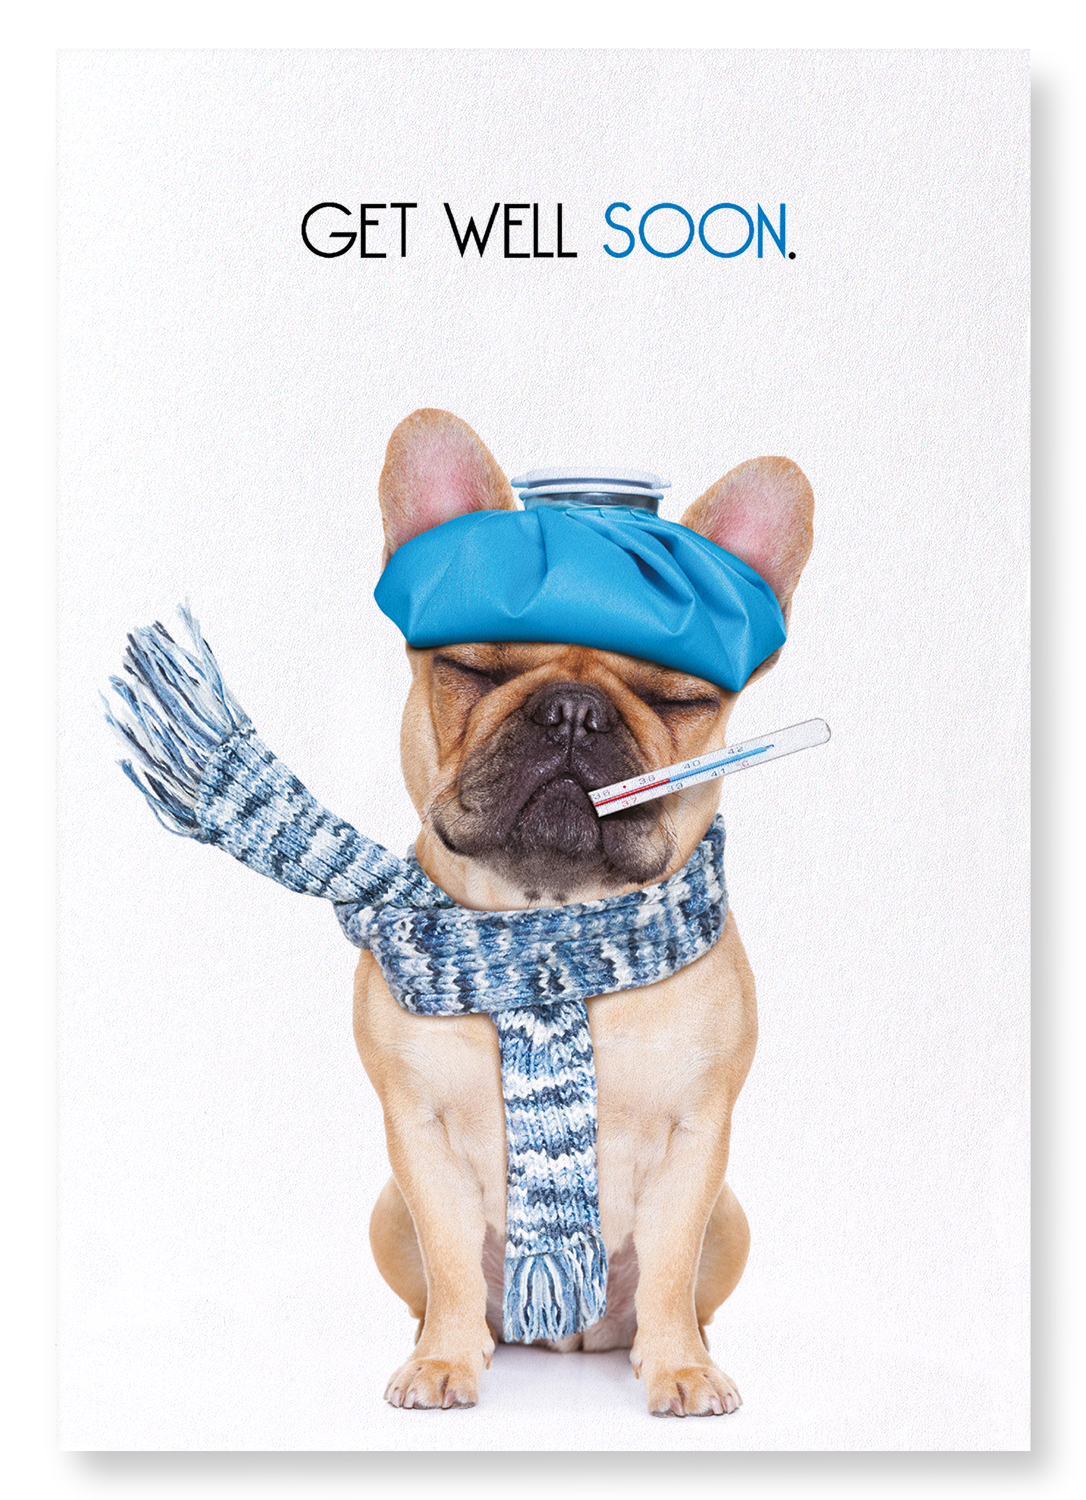 GET WELL SOON FRENCHIE : Funny Animal Art print